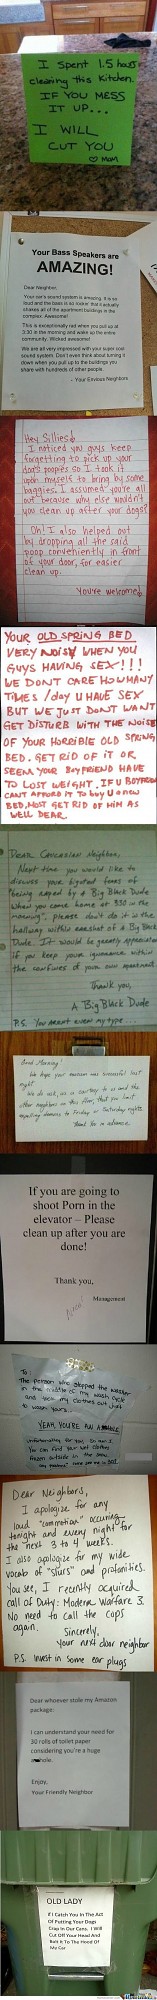 Notes to neighbors